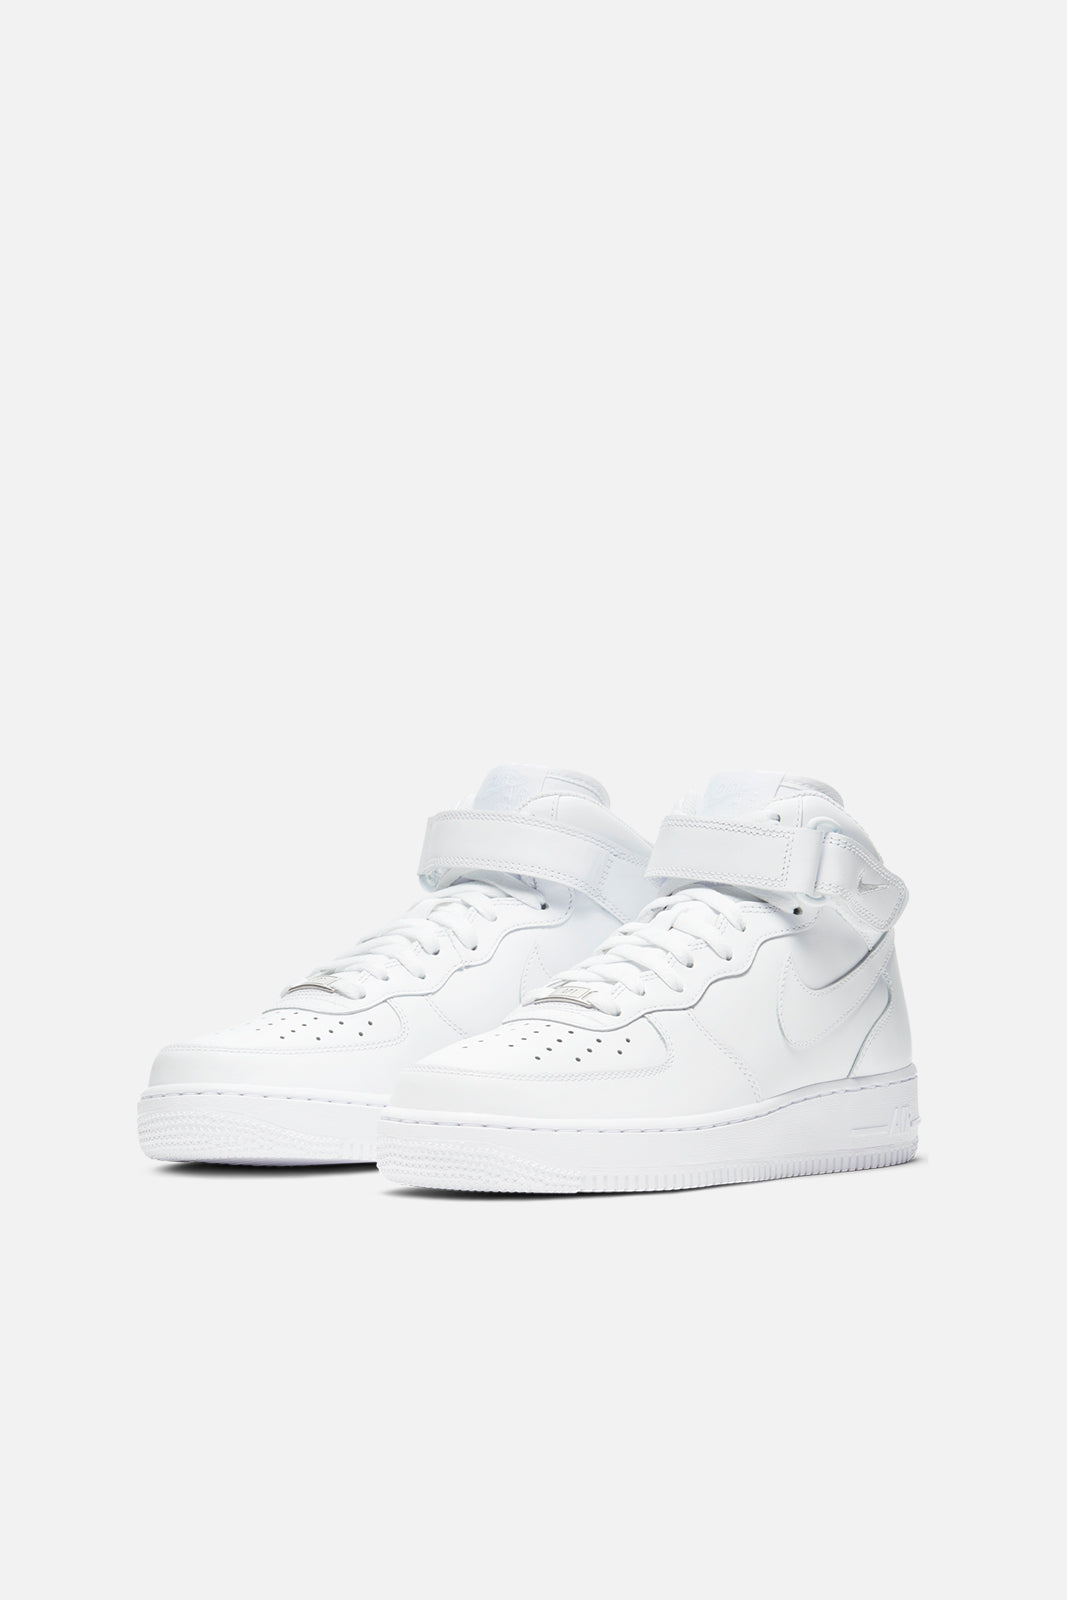 Nike Women's Air Force 1 '07 Mid